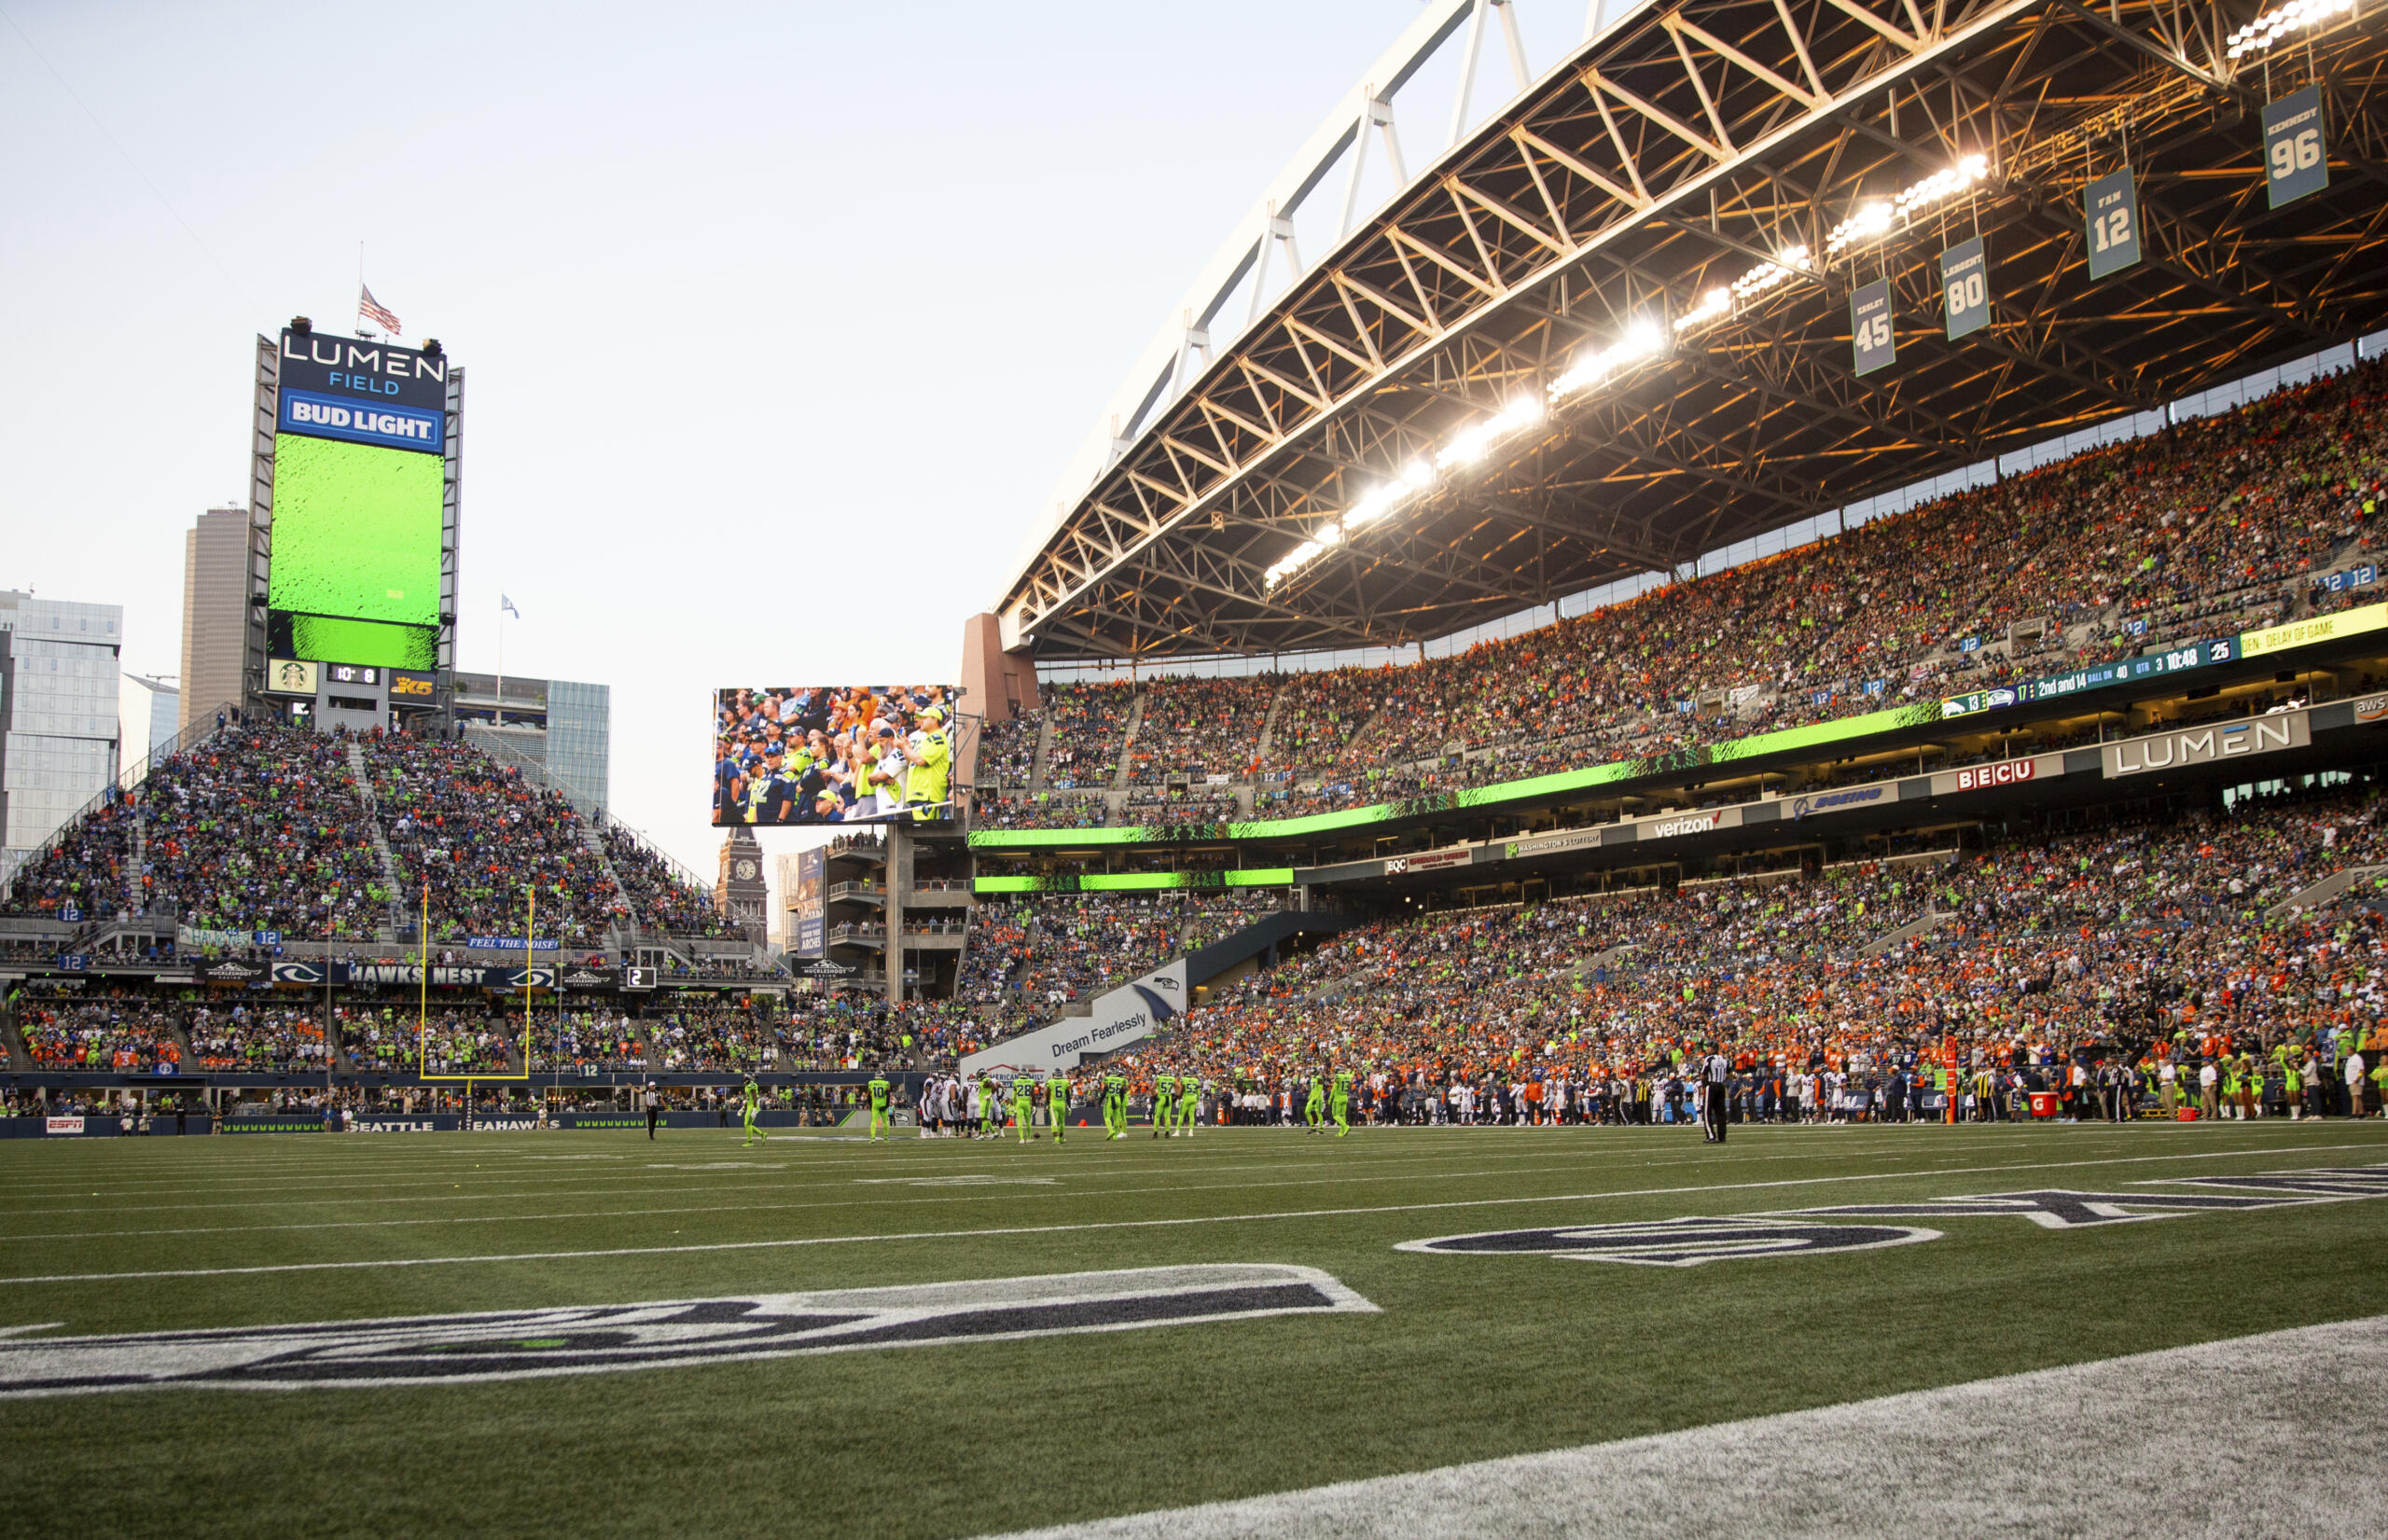 A general view of Lumen Field during the second half of an NFL football game between the Seattle Seahawks and the Denver Broncos, Monday, Sept. 12, 2022, in Seattle. The Seahawks beat the Broncos 17-16.